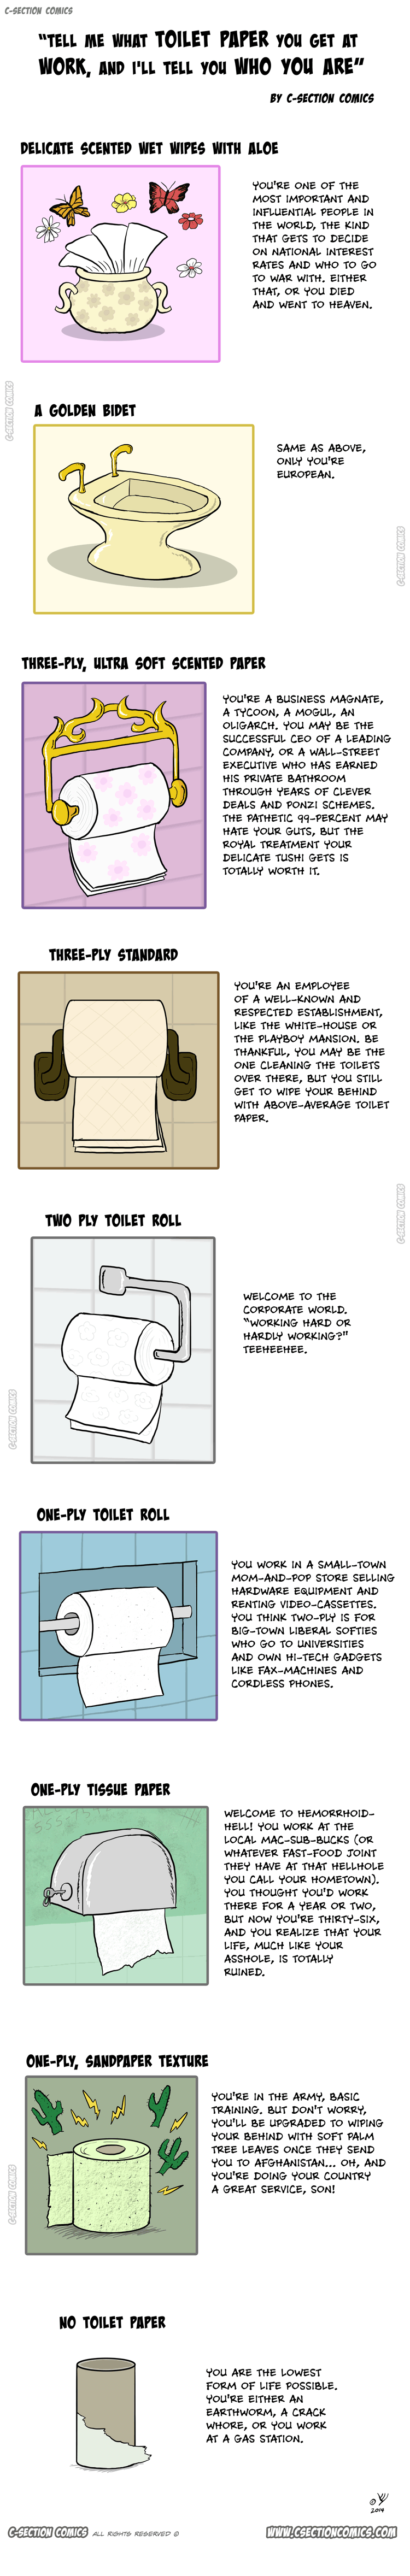 How Your Job Affects Your Toilet Paper